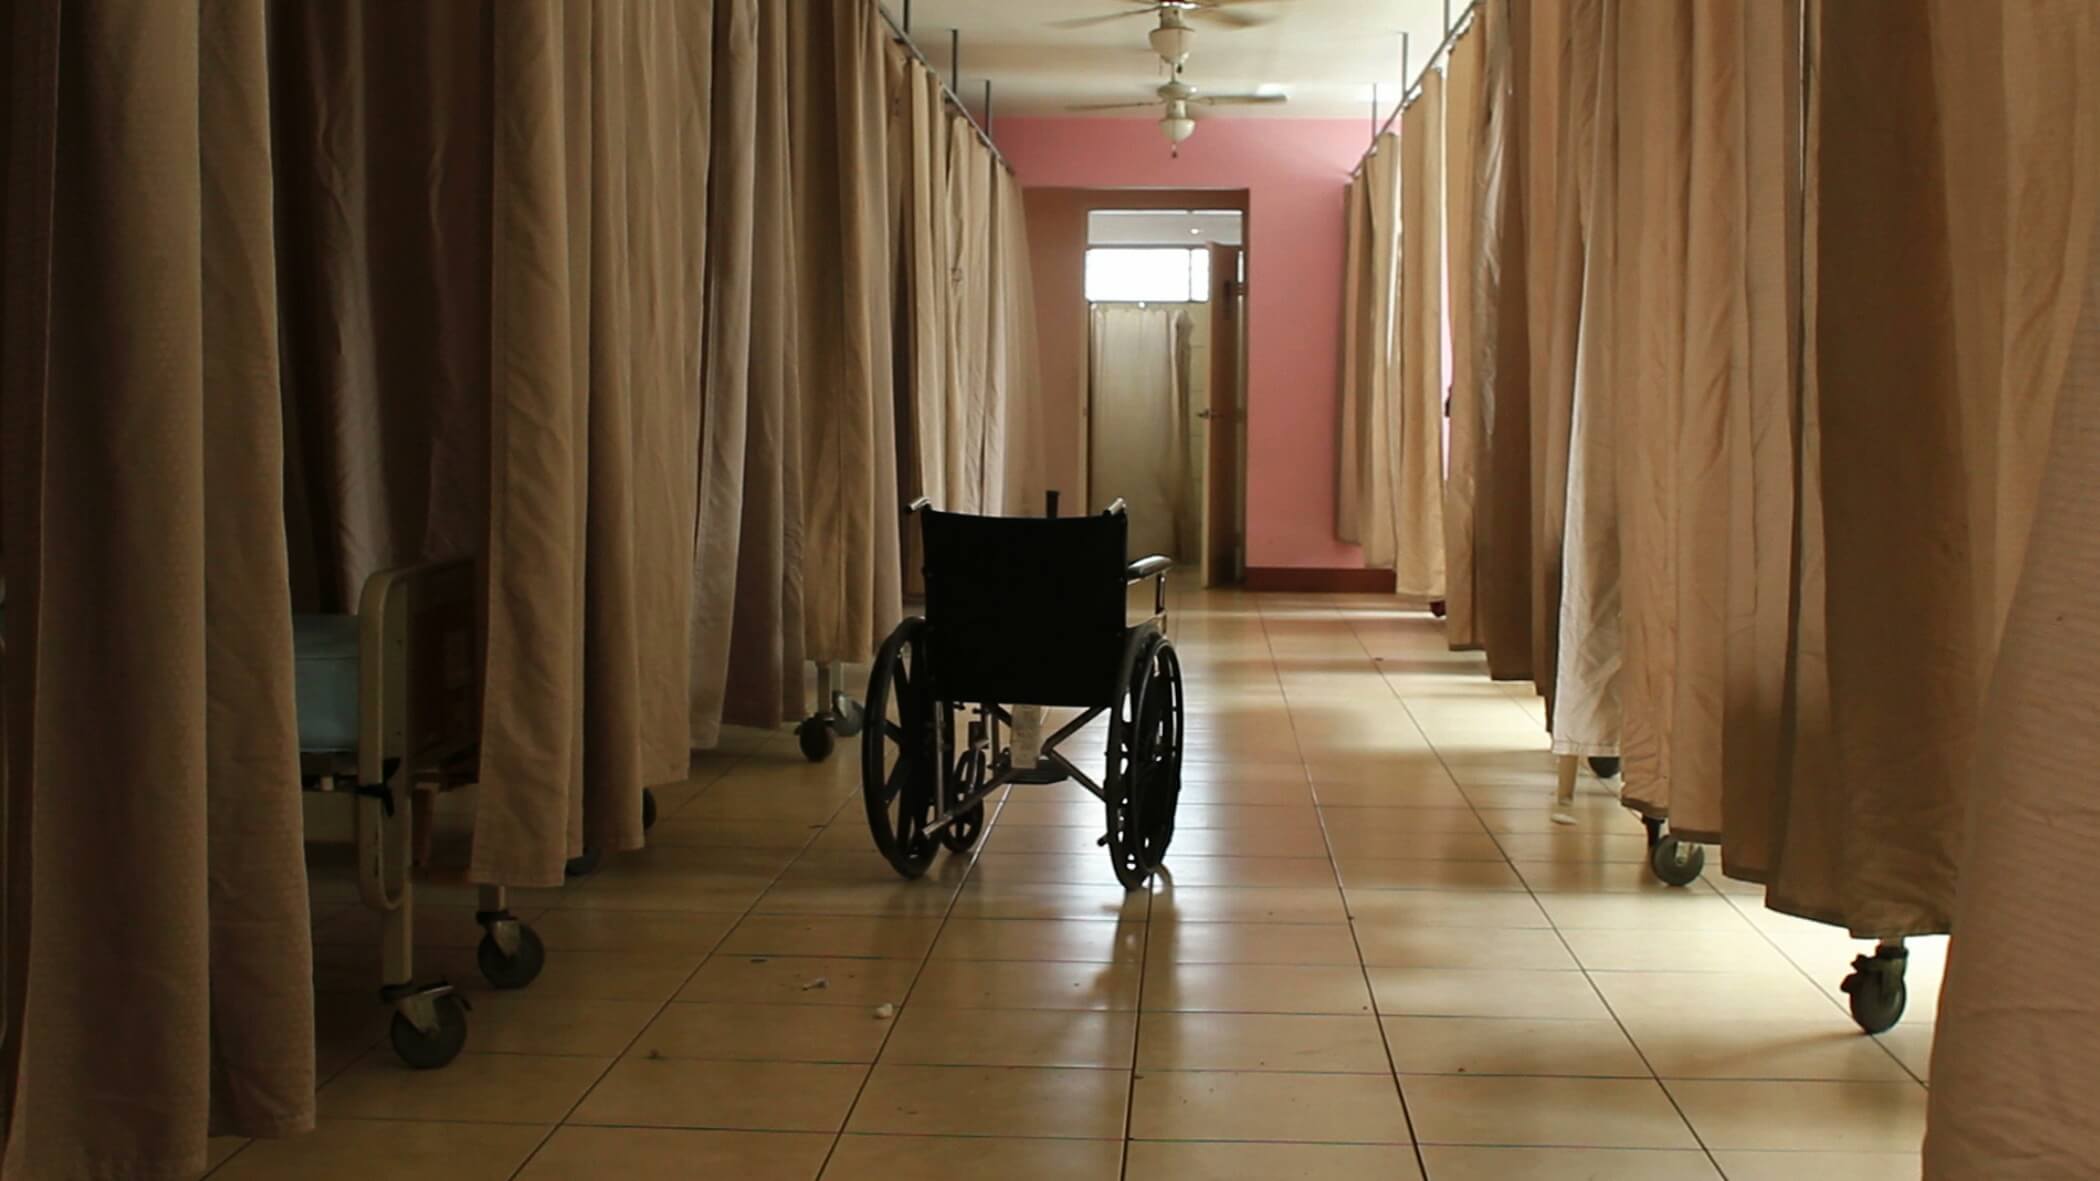 Still of A Quiet Inquisition. Shot of a wheelchair in a hospital room with curtains between each bed.